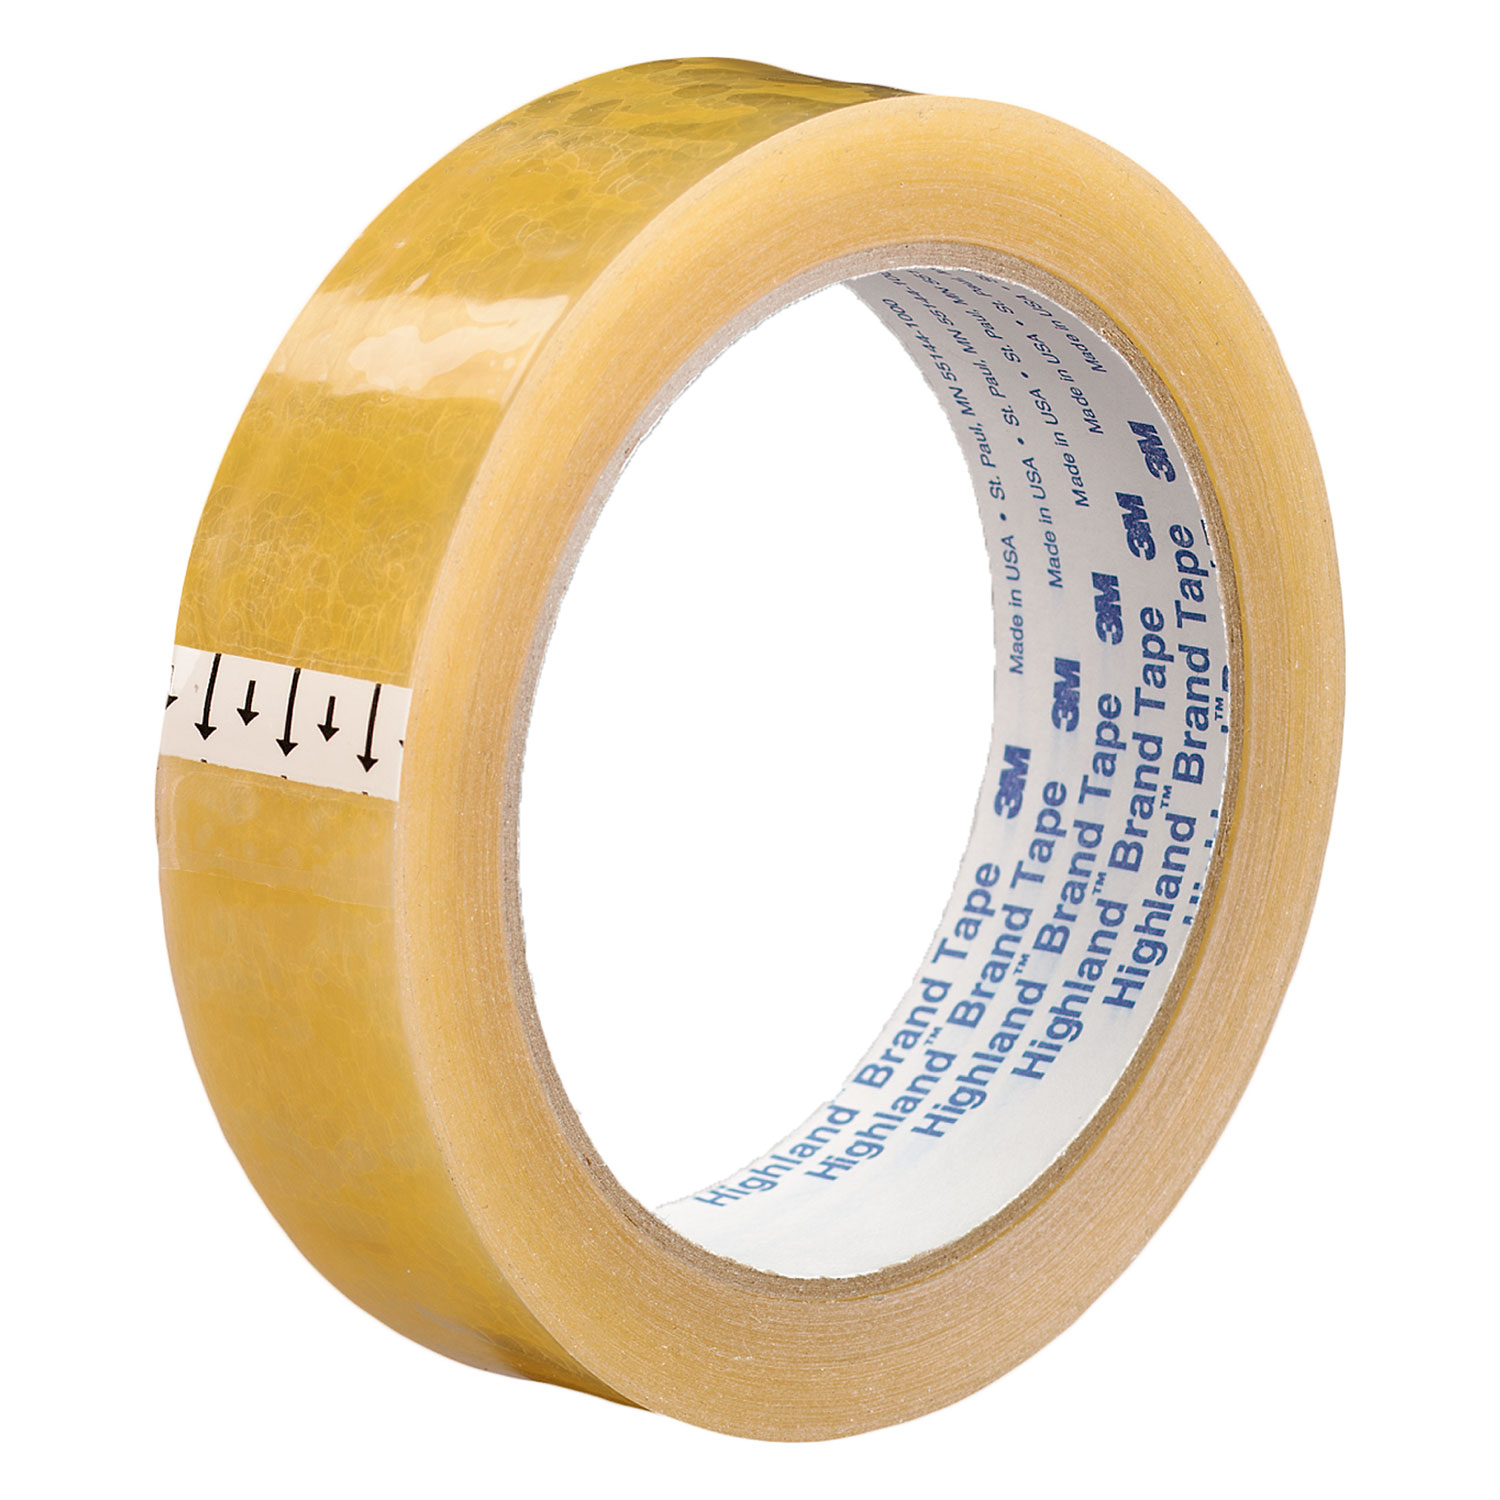  Highland 5910 Transparent Tape, 3 Core, 1 x 72 yds, Clear (MMM591012592) 